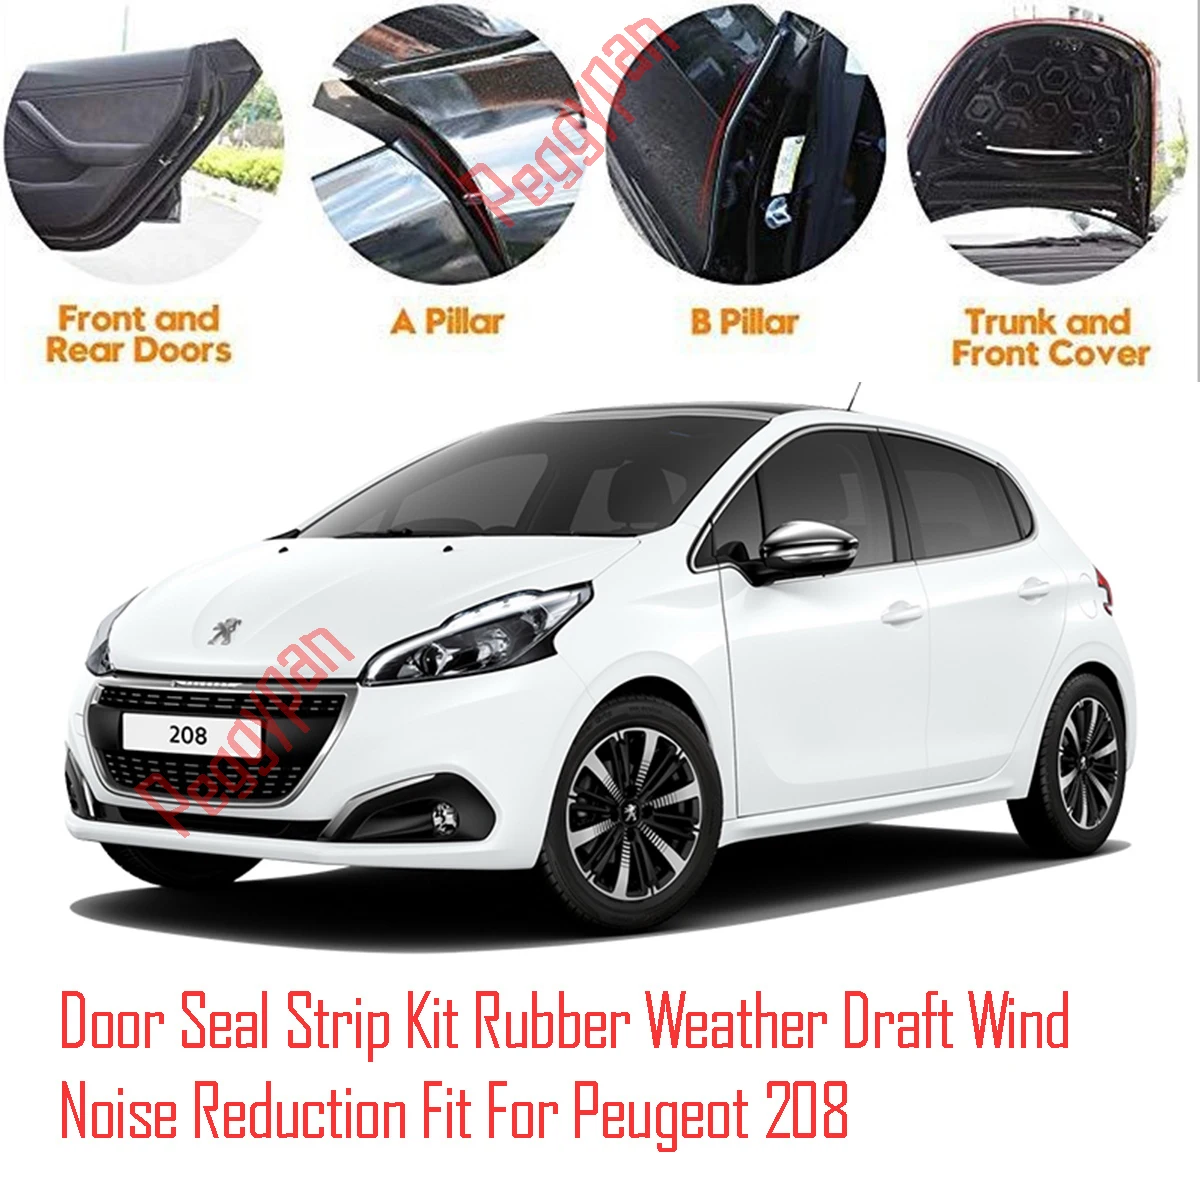 Door Seal Strip Kit Self Adhesive Window Engine Cover Soundproof Rubber Weather Draft Wind Noise Reduction Fit For Peugeot 208